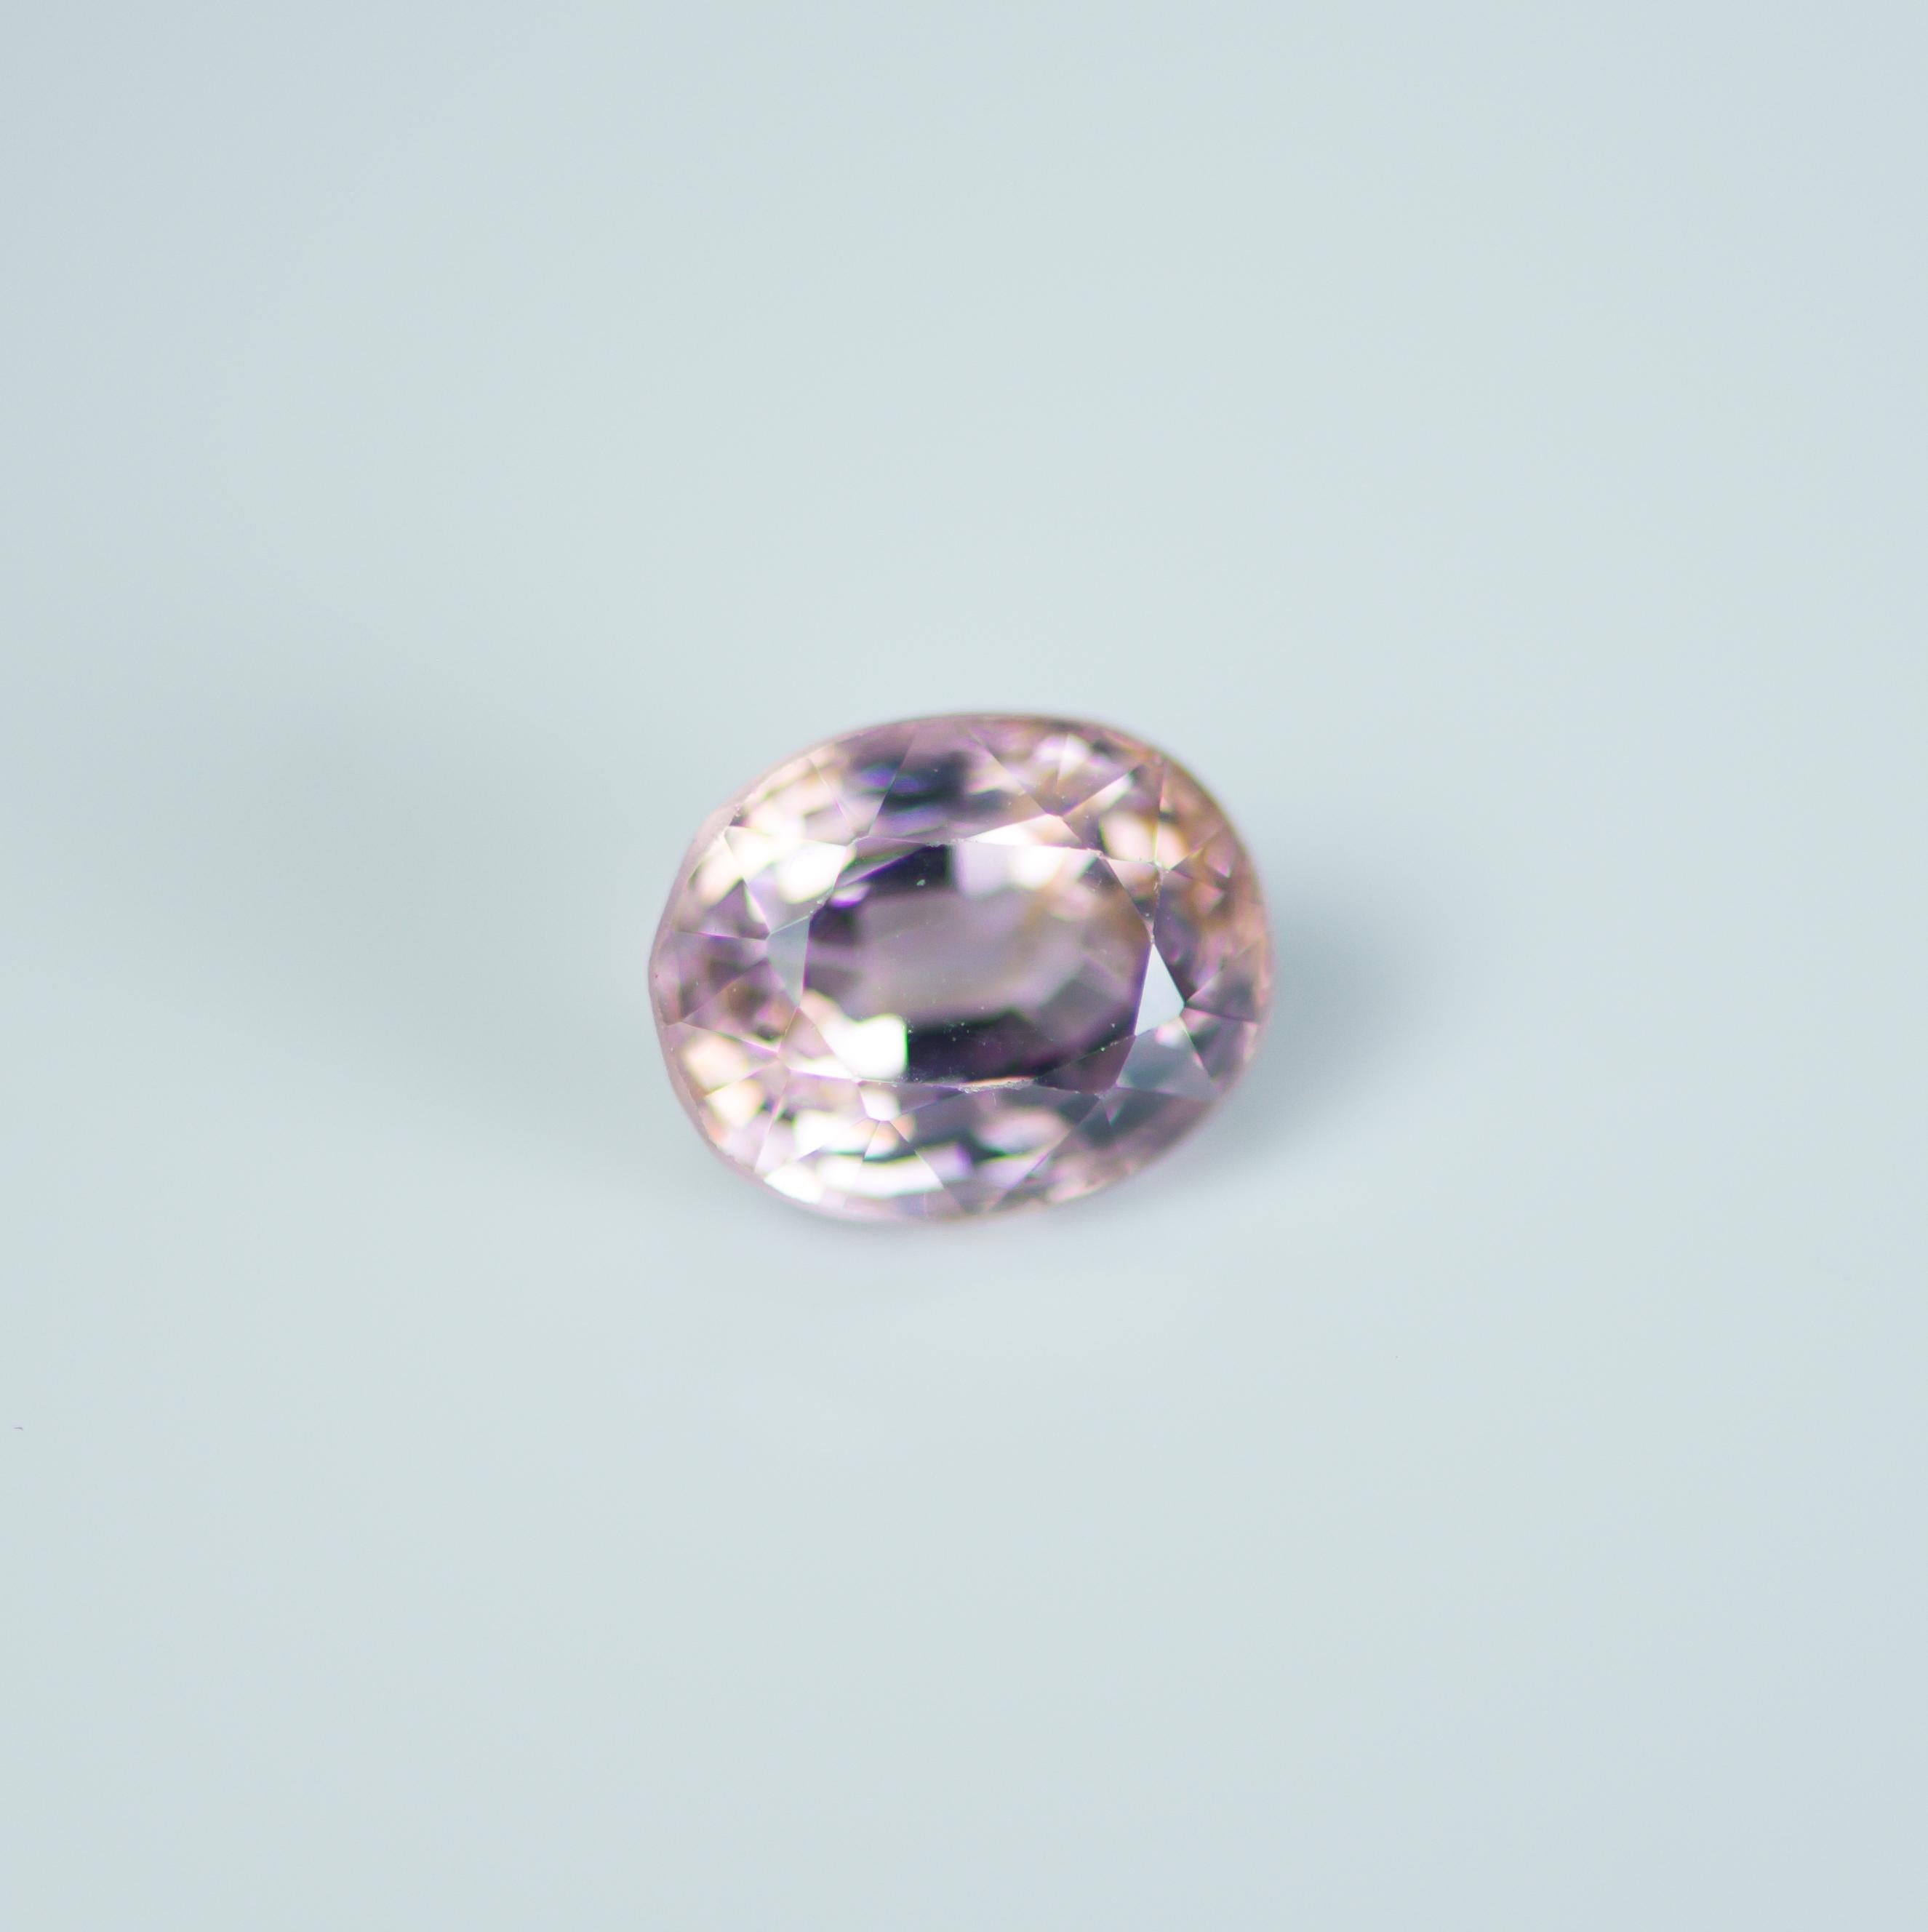 Species : Natural Spinel
Shape and Cut : Oval Mixed Cut
Weight : 1.09 CARAT
Measurements : 6.25 x 5.02 x 4.28 mm
Color : Purplish Brown
Transparency : Transparent
Treatment : No Treatments

This Beautiful Spinel Can Be Used to Make Very Fine Jewelry